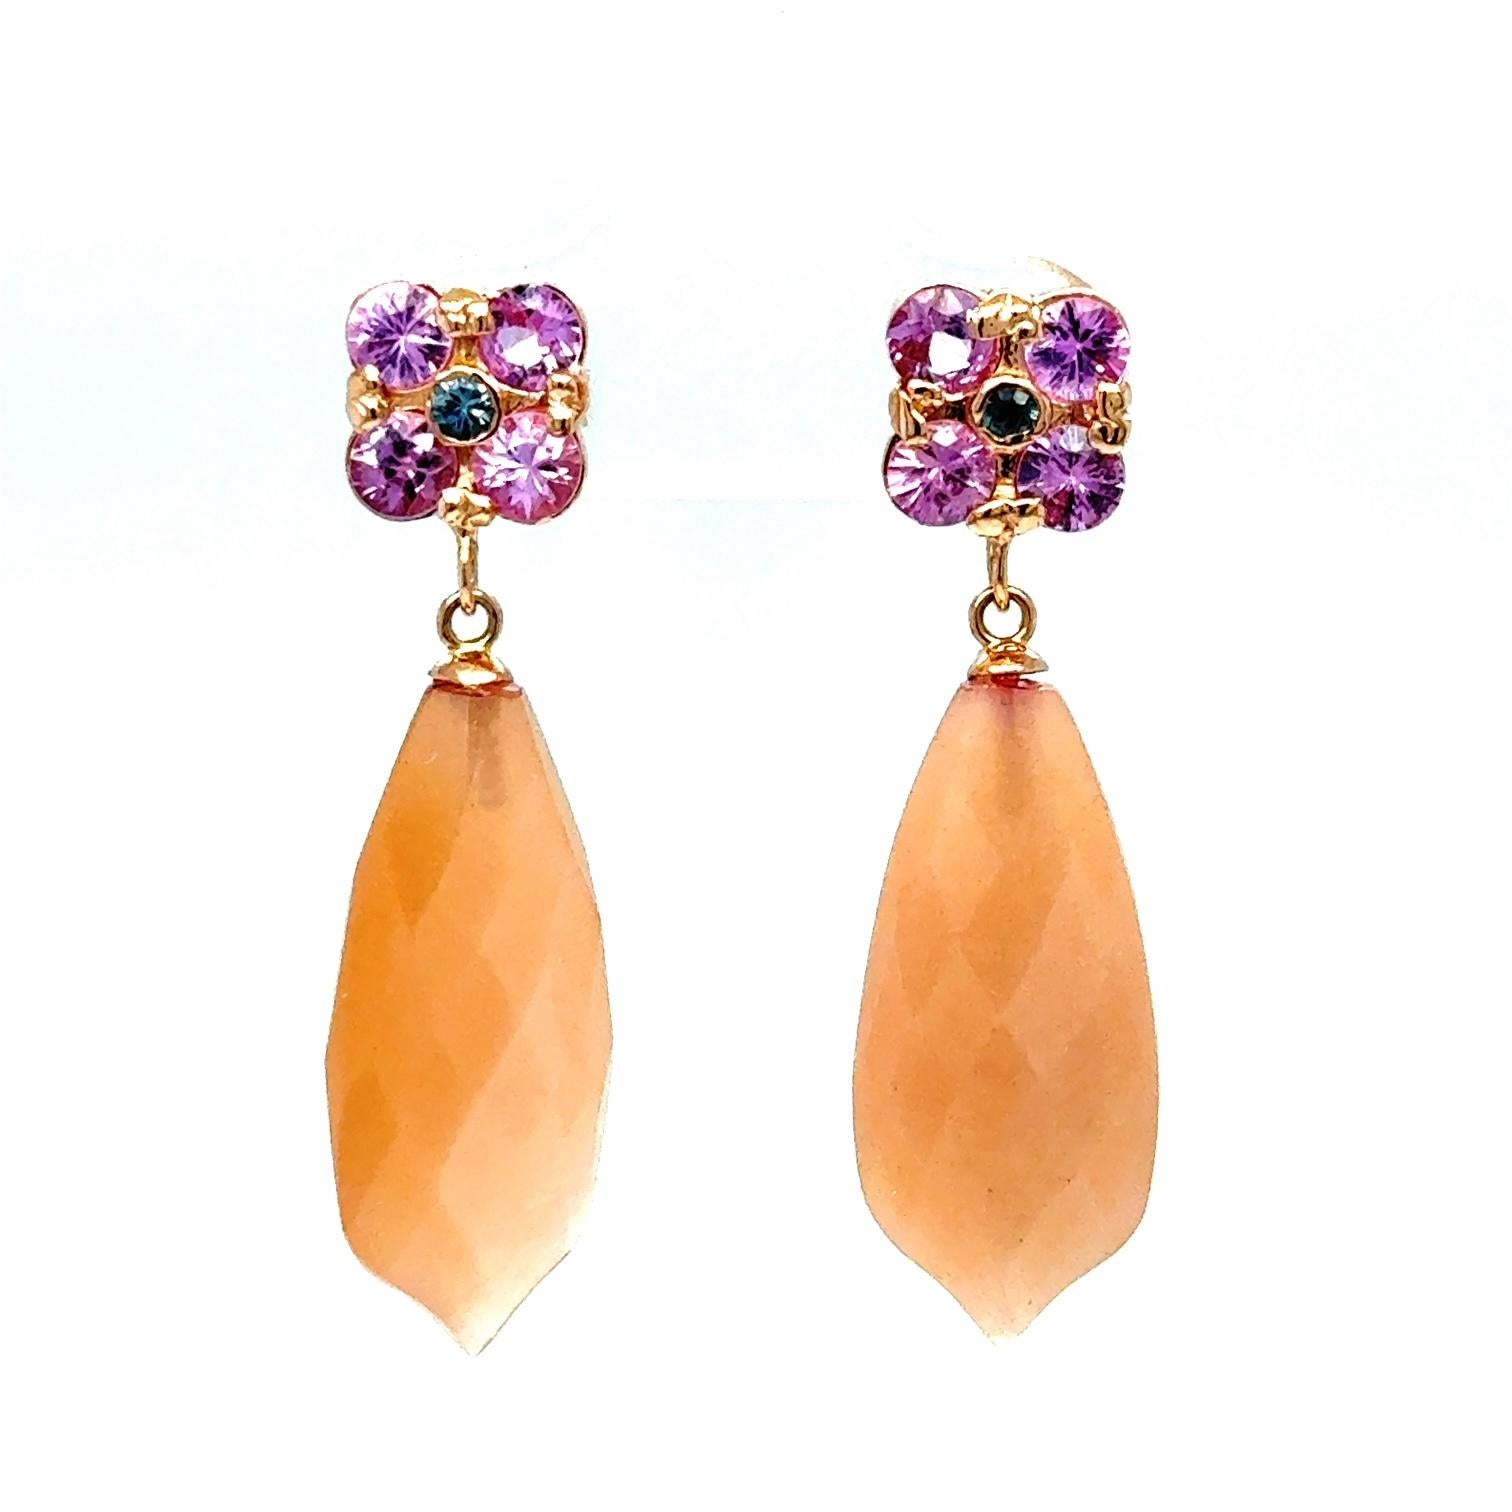 17.61 Carat Peach Moonstone Sapphire Rose Gold Drop Earrings

Item Specs:

2 Peach Moonstone stones weighing approximately 16.15 carats
(Measurements of Peach Moonstone is 22mm x 10mm)
10 Round Cut Pink and Blue Sapphires weighing approximately 1.46